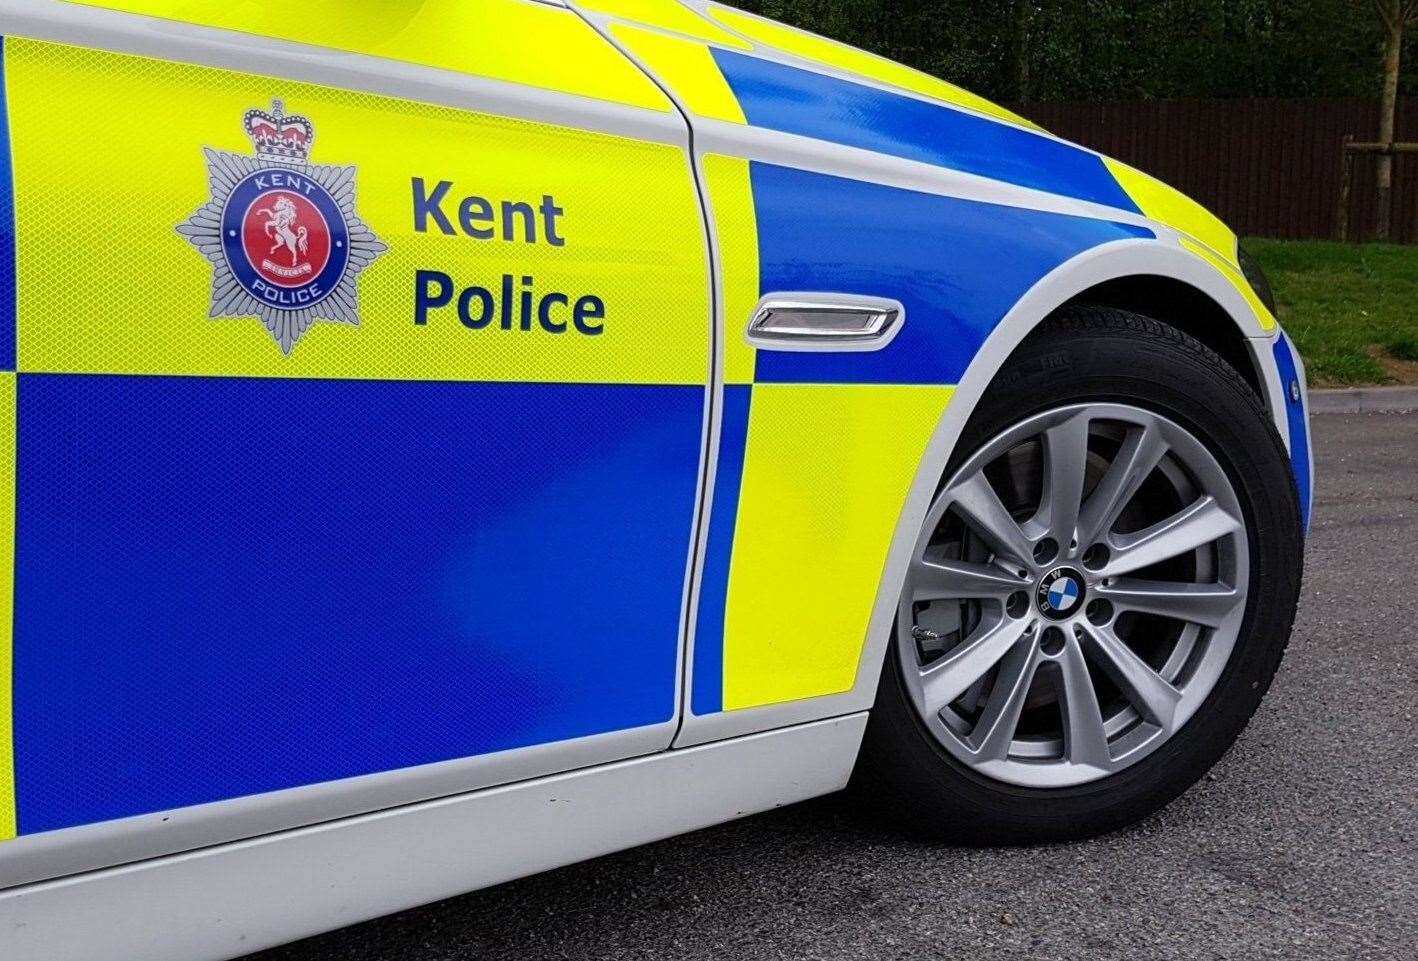 A police chase came to an end when a vehicle was abandoned in Dartford - an arrest was subsequently made.